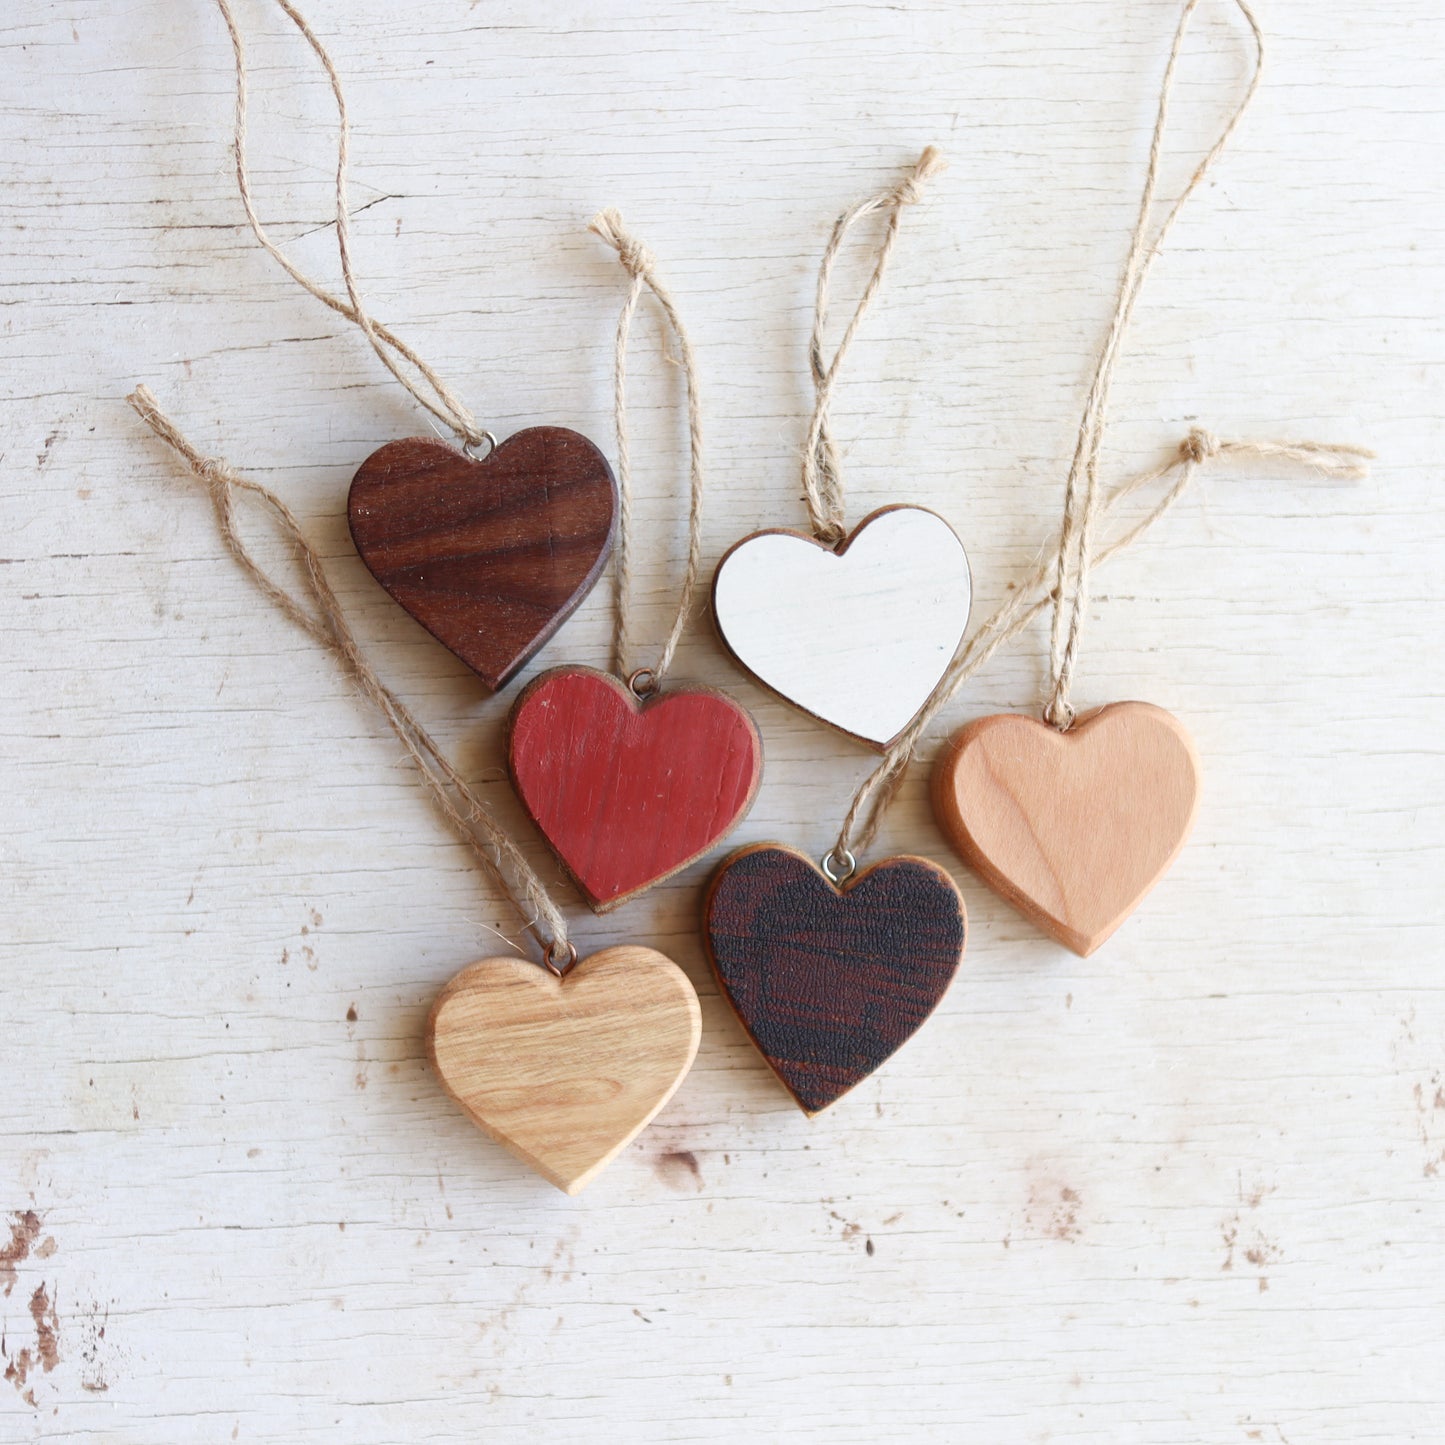 Reclaimed Wood Ornament Collections